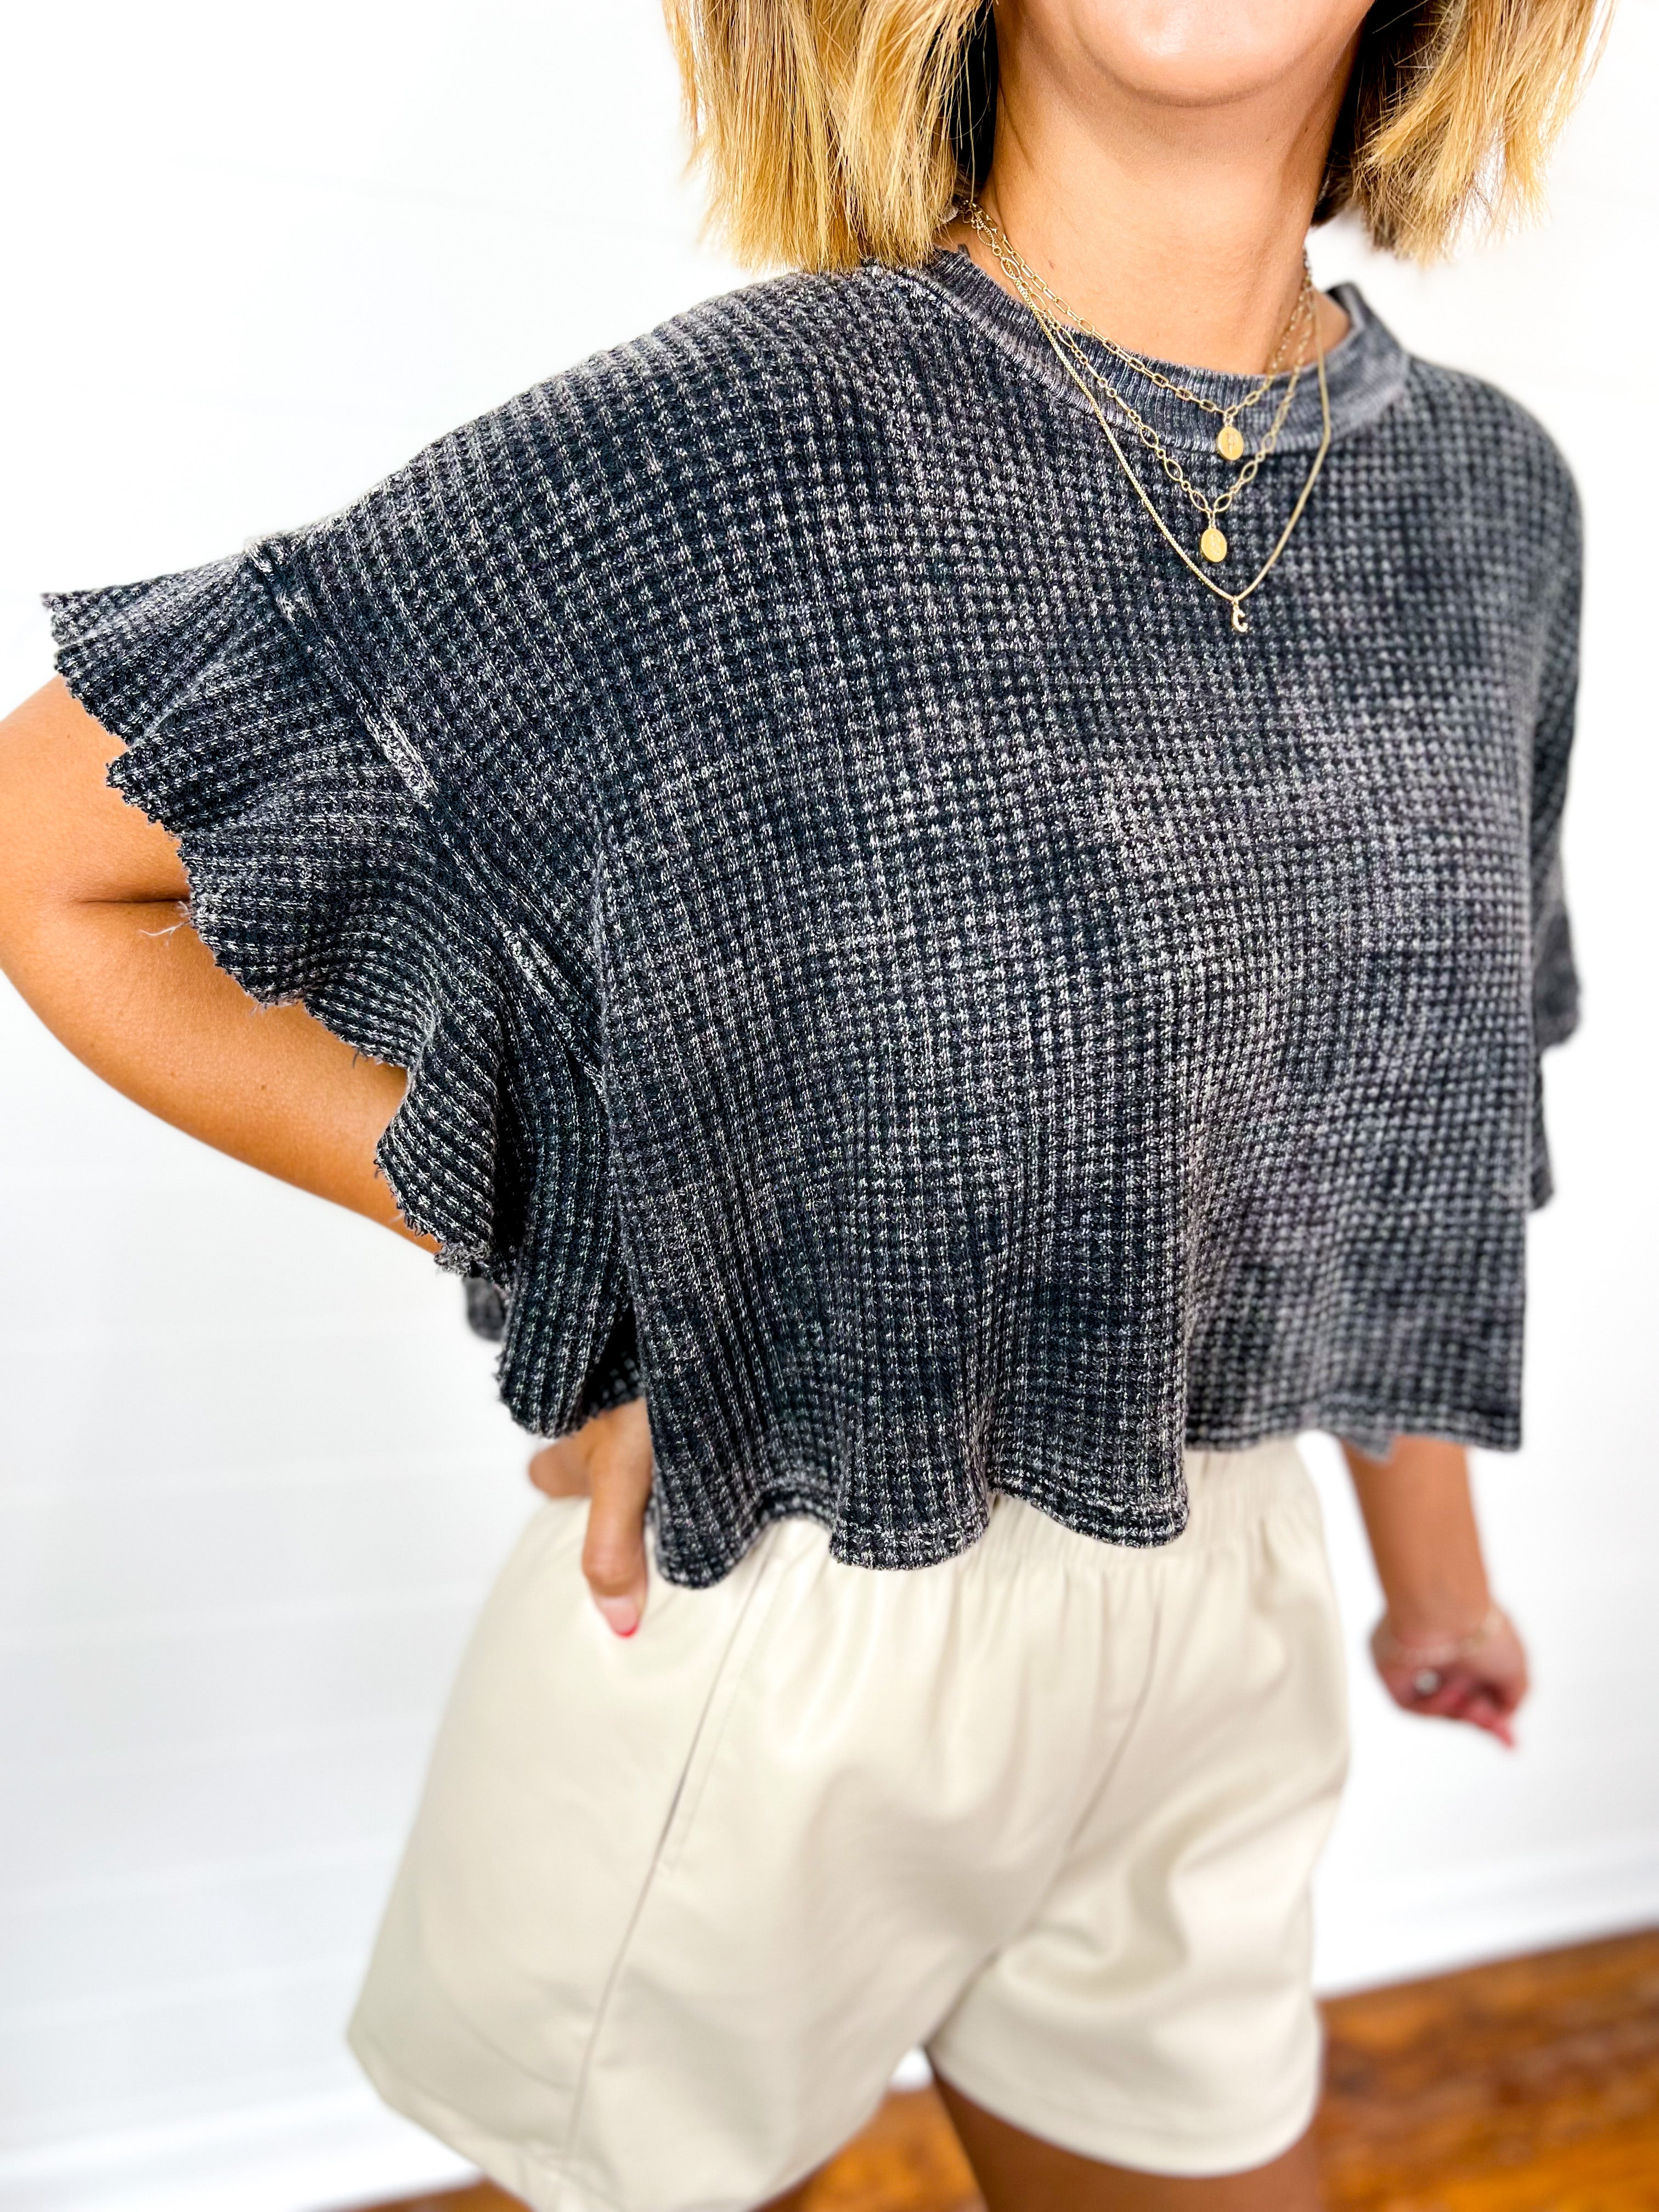 Ruffled Garment Mineral-Wash Charcoal Cropped Top